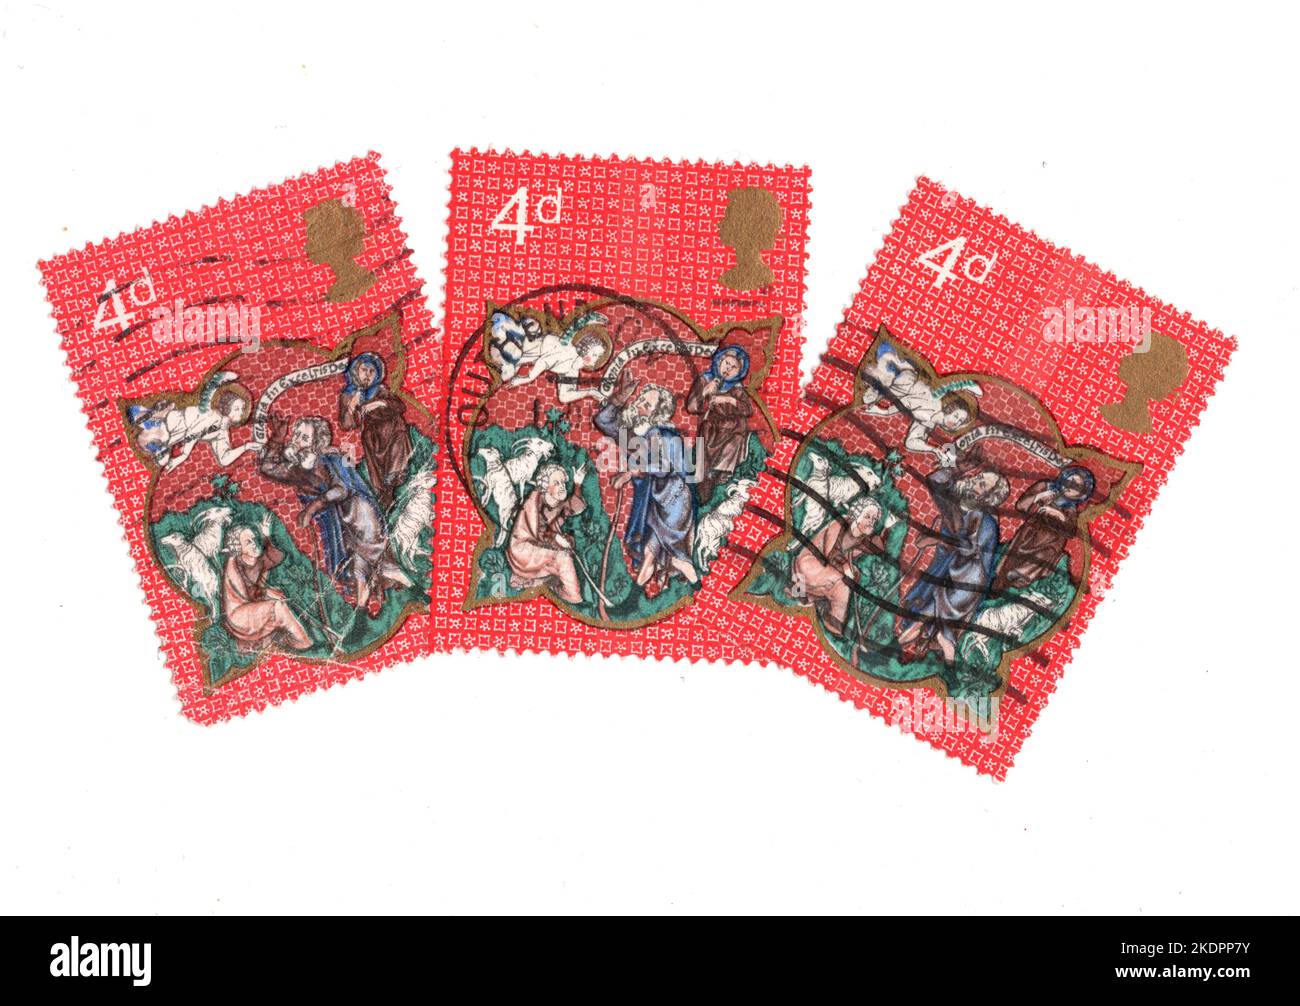 Vintage Christmas stamps from the United Kingdom on a white background. Stock Photo